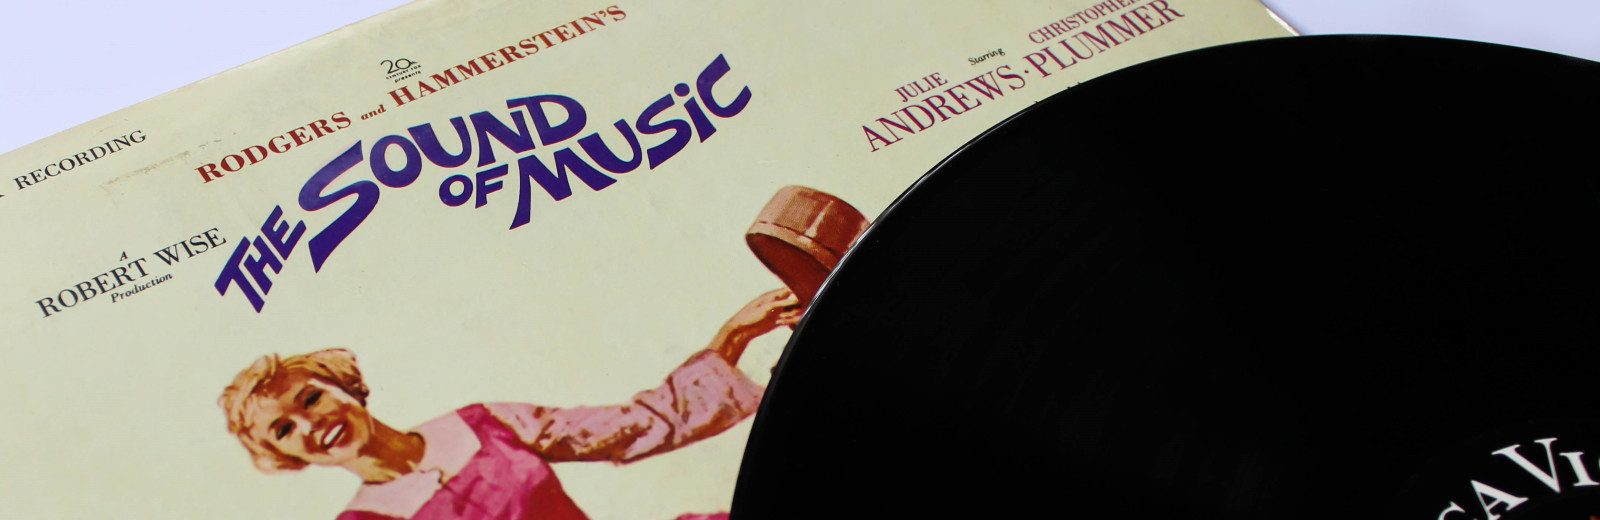 Sound of Music record